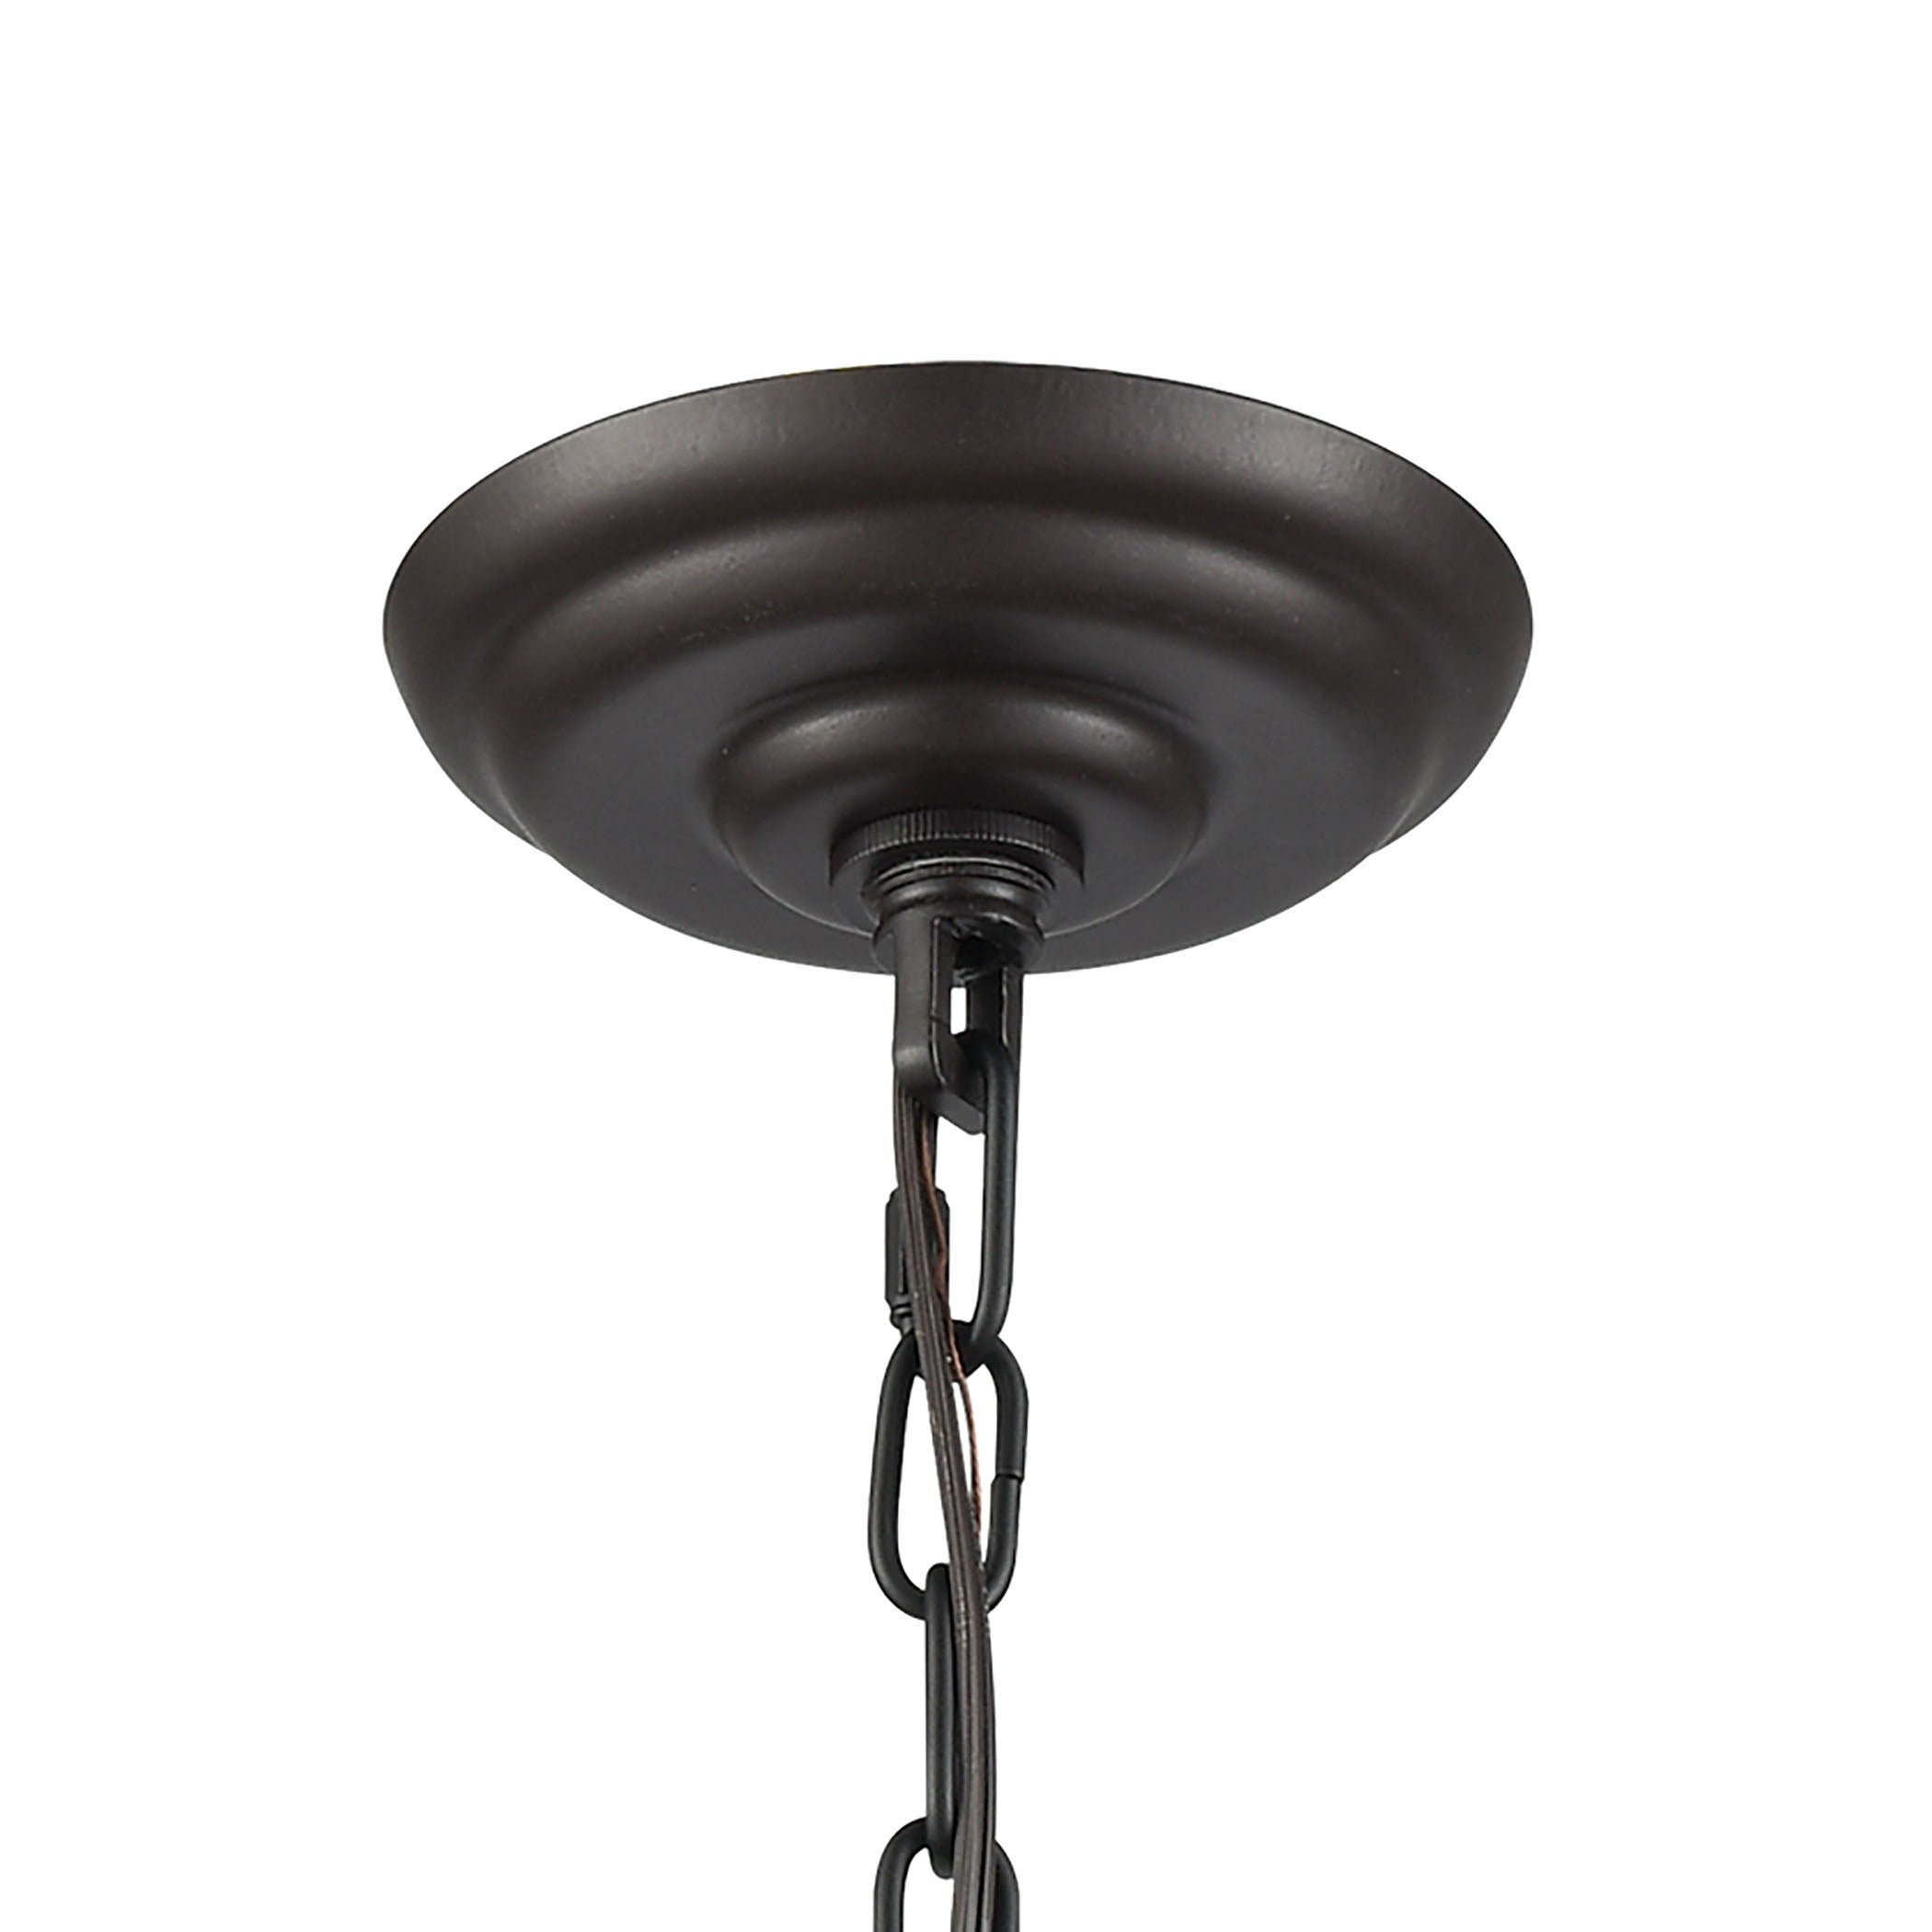 ELK Lighting 56580/1 Victoriana 1-Light Mini Pendant in Oil Rubbed Bronze with Clear Crosshatched Glass